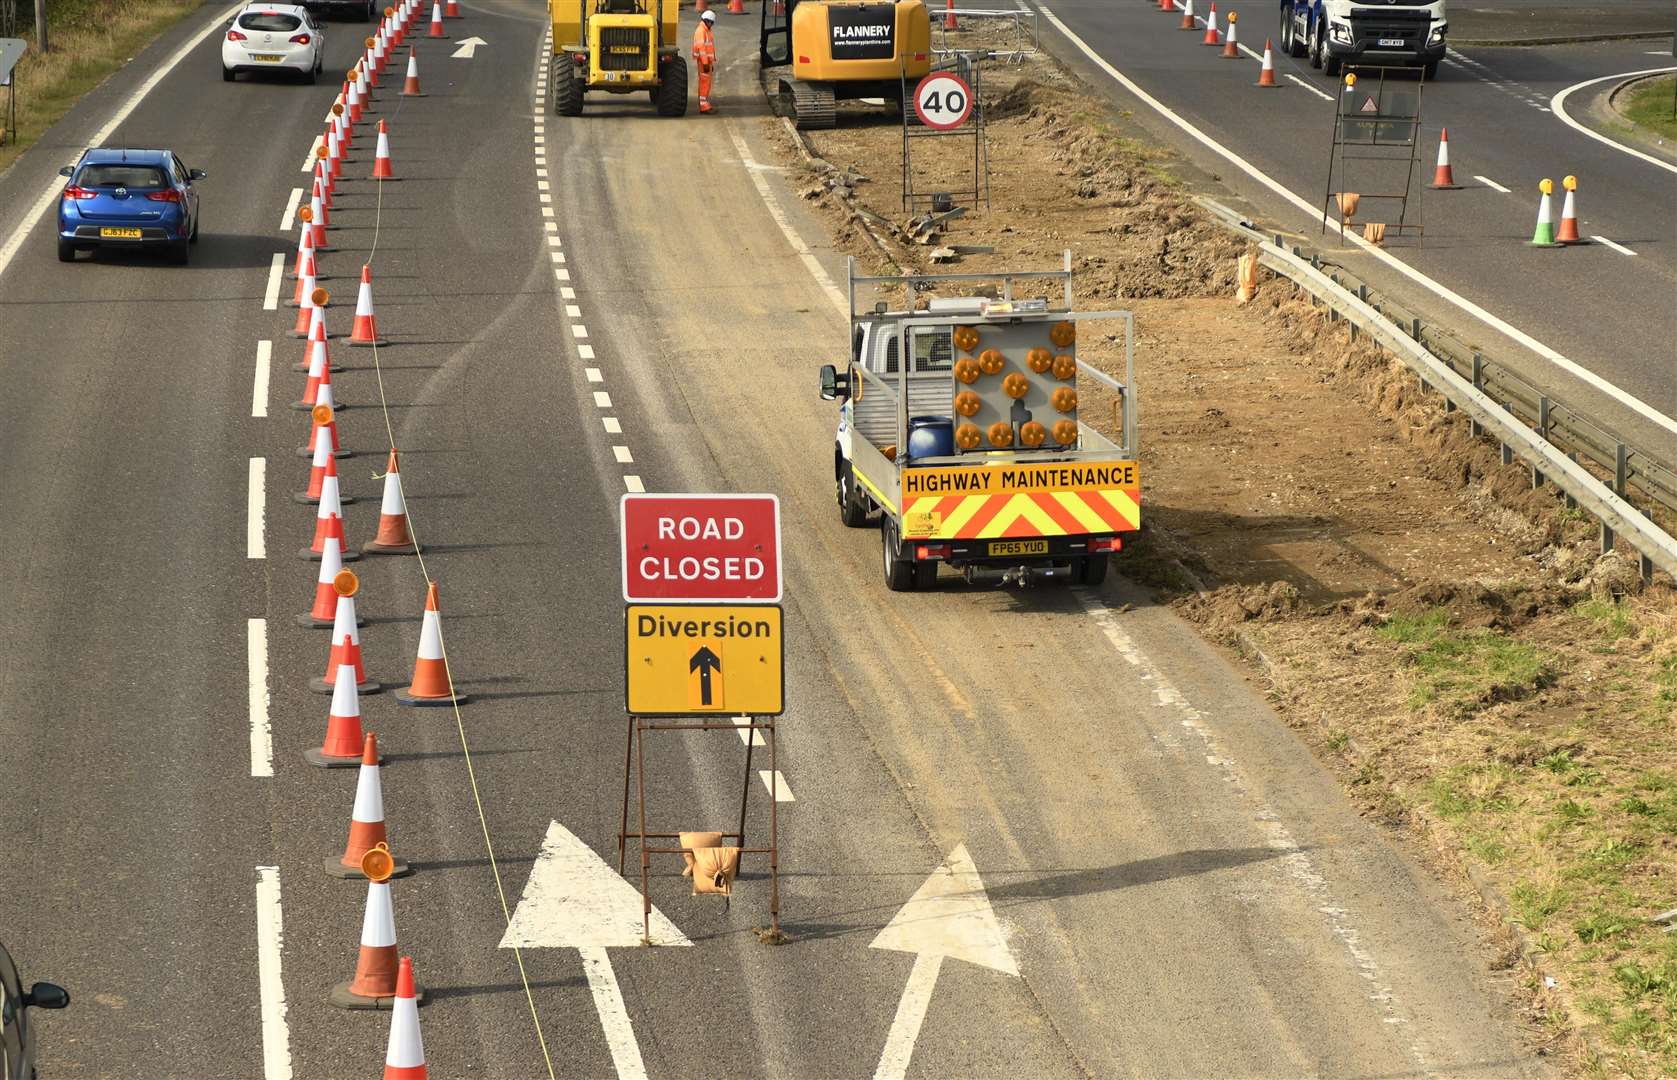 Motorists should look out for roadworks